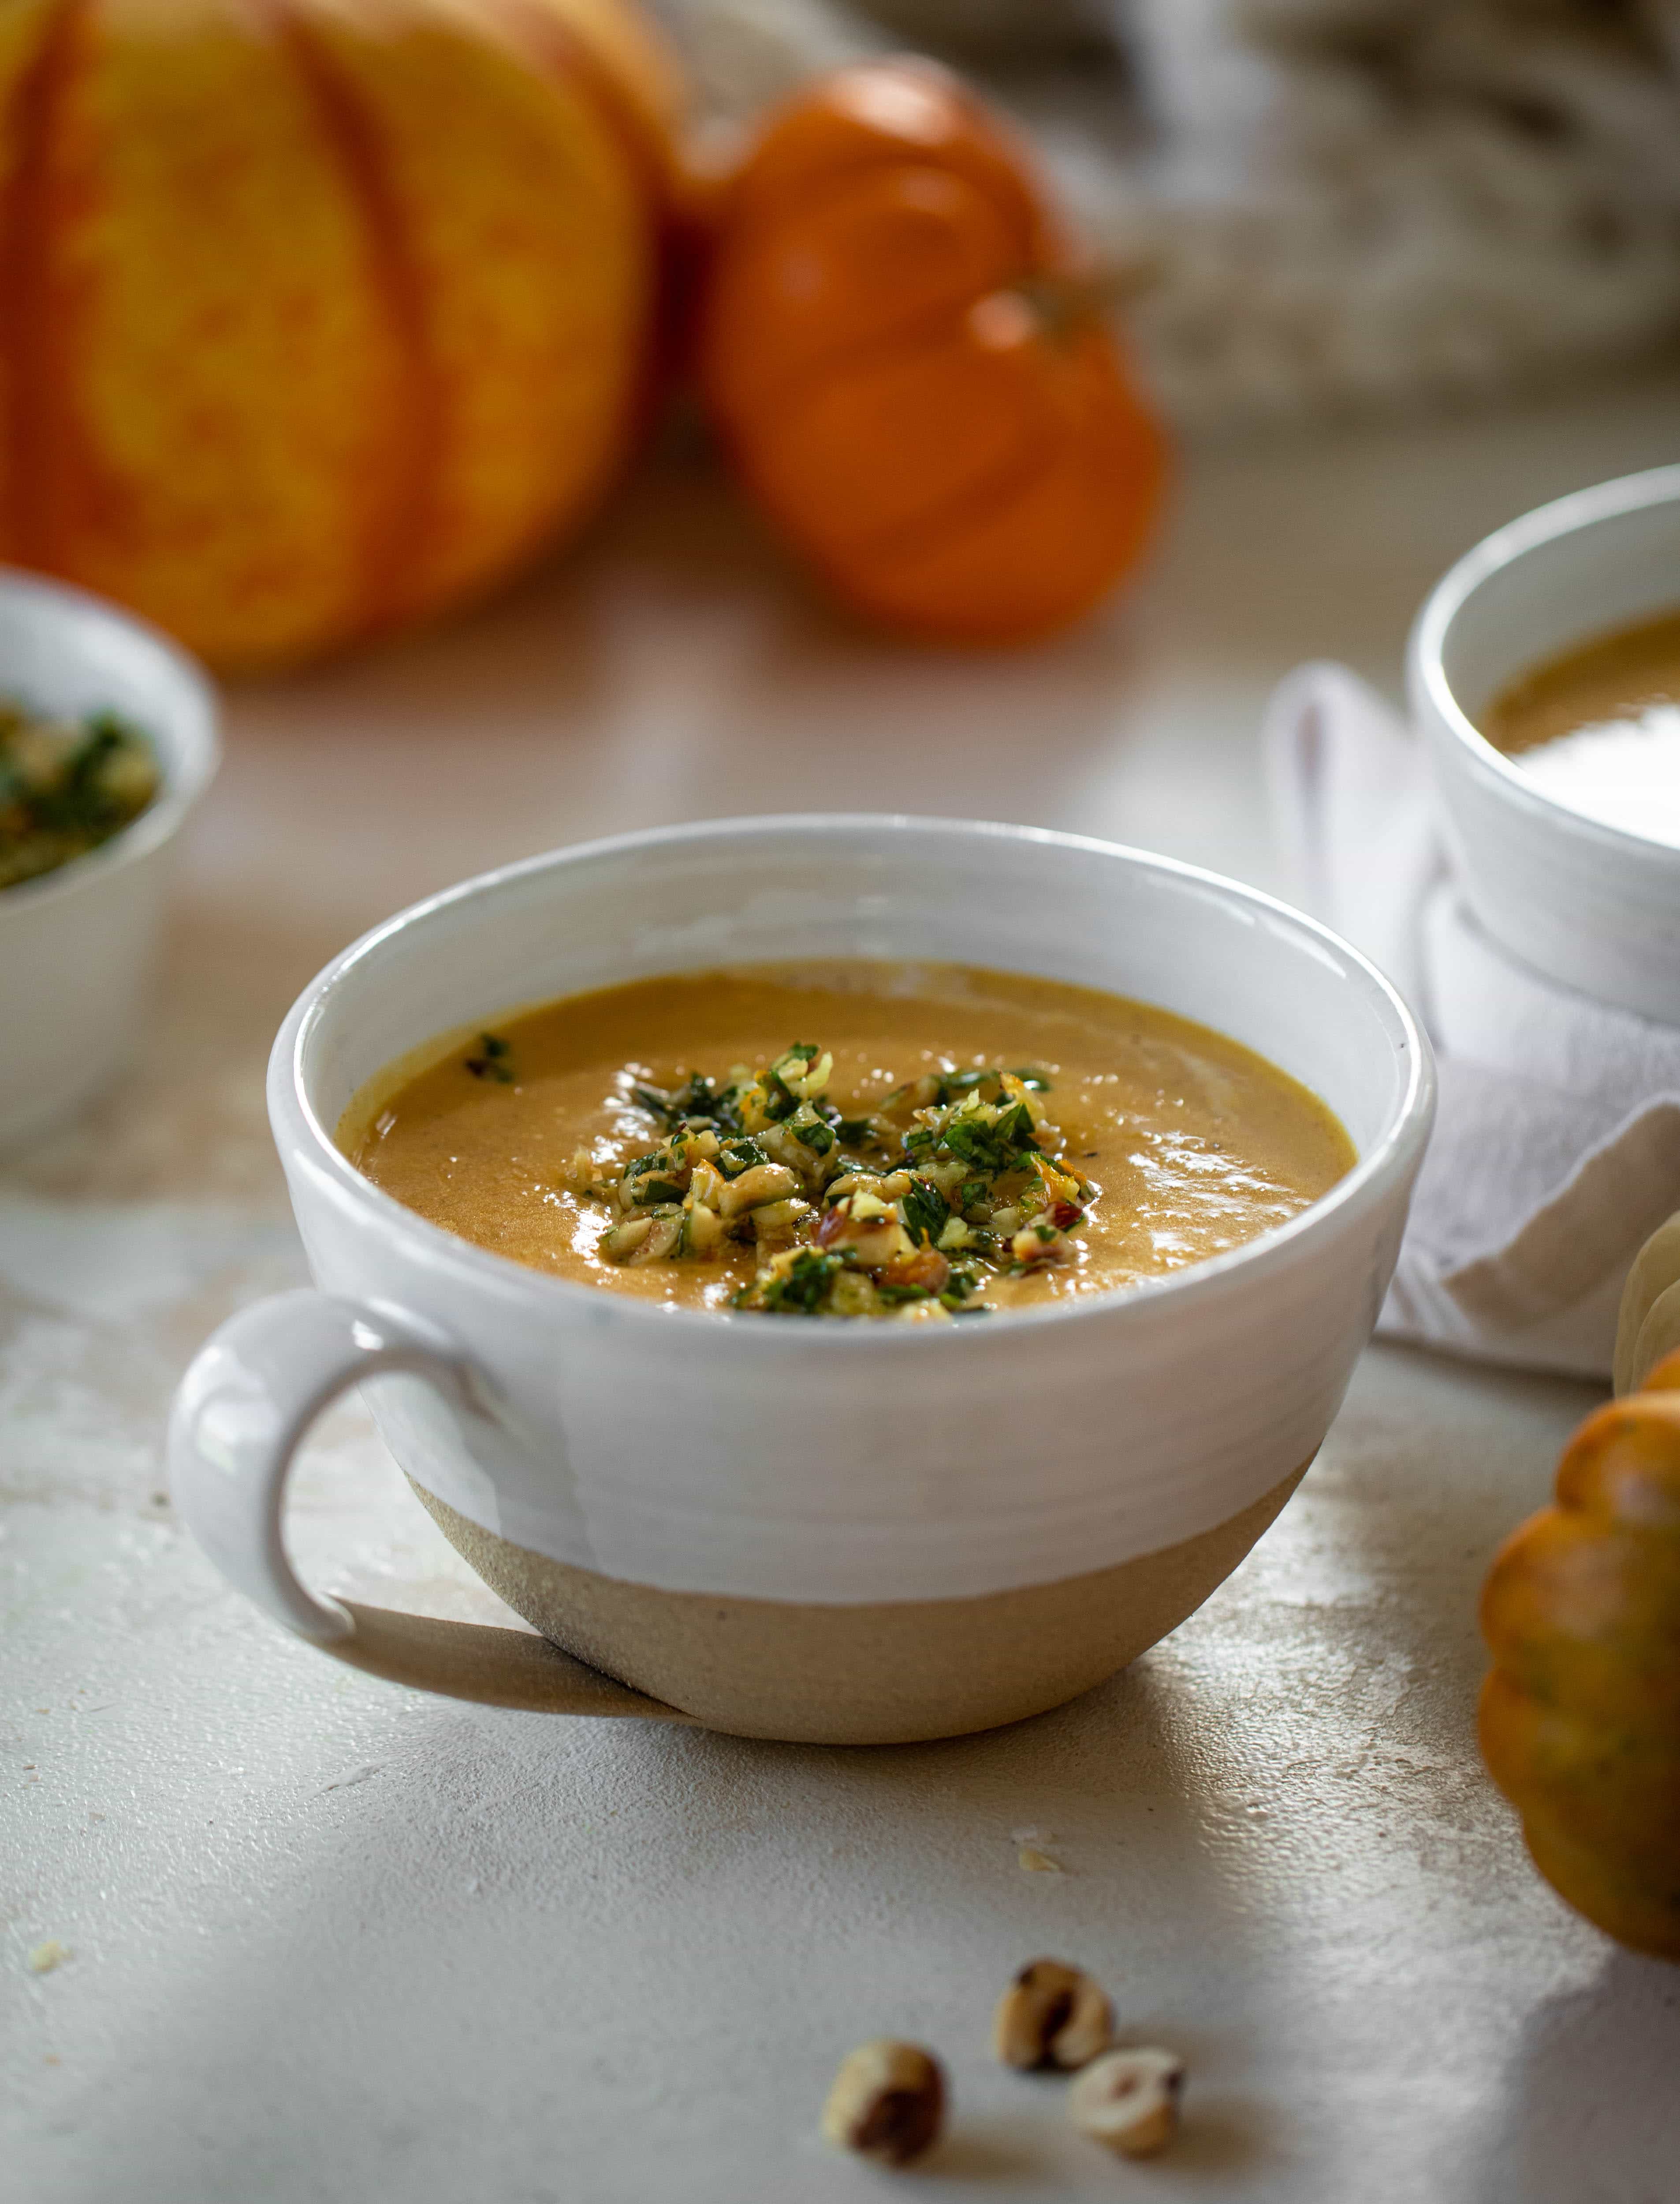 This pumpkin cream soup is silky smooth and delicious, then topped with a roasted hazelnut gremolata for extra flavor and crunch!